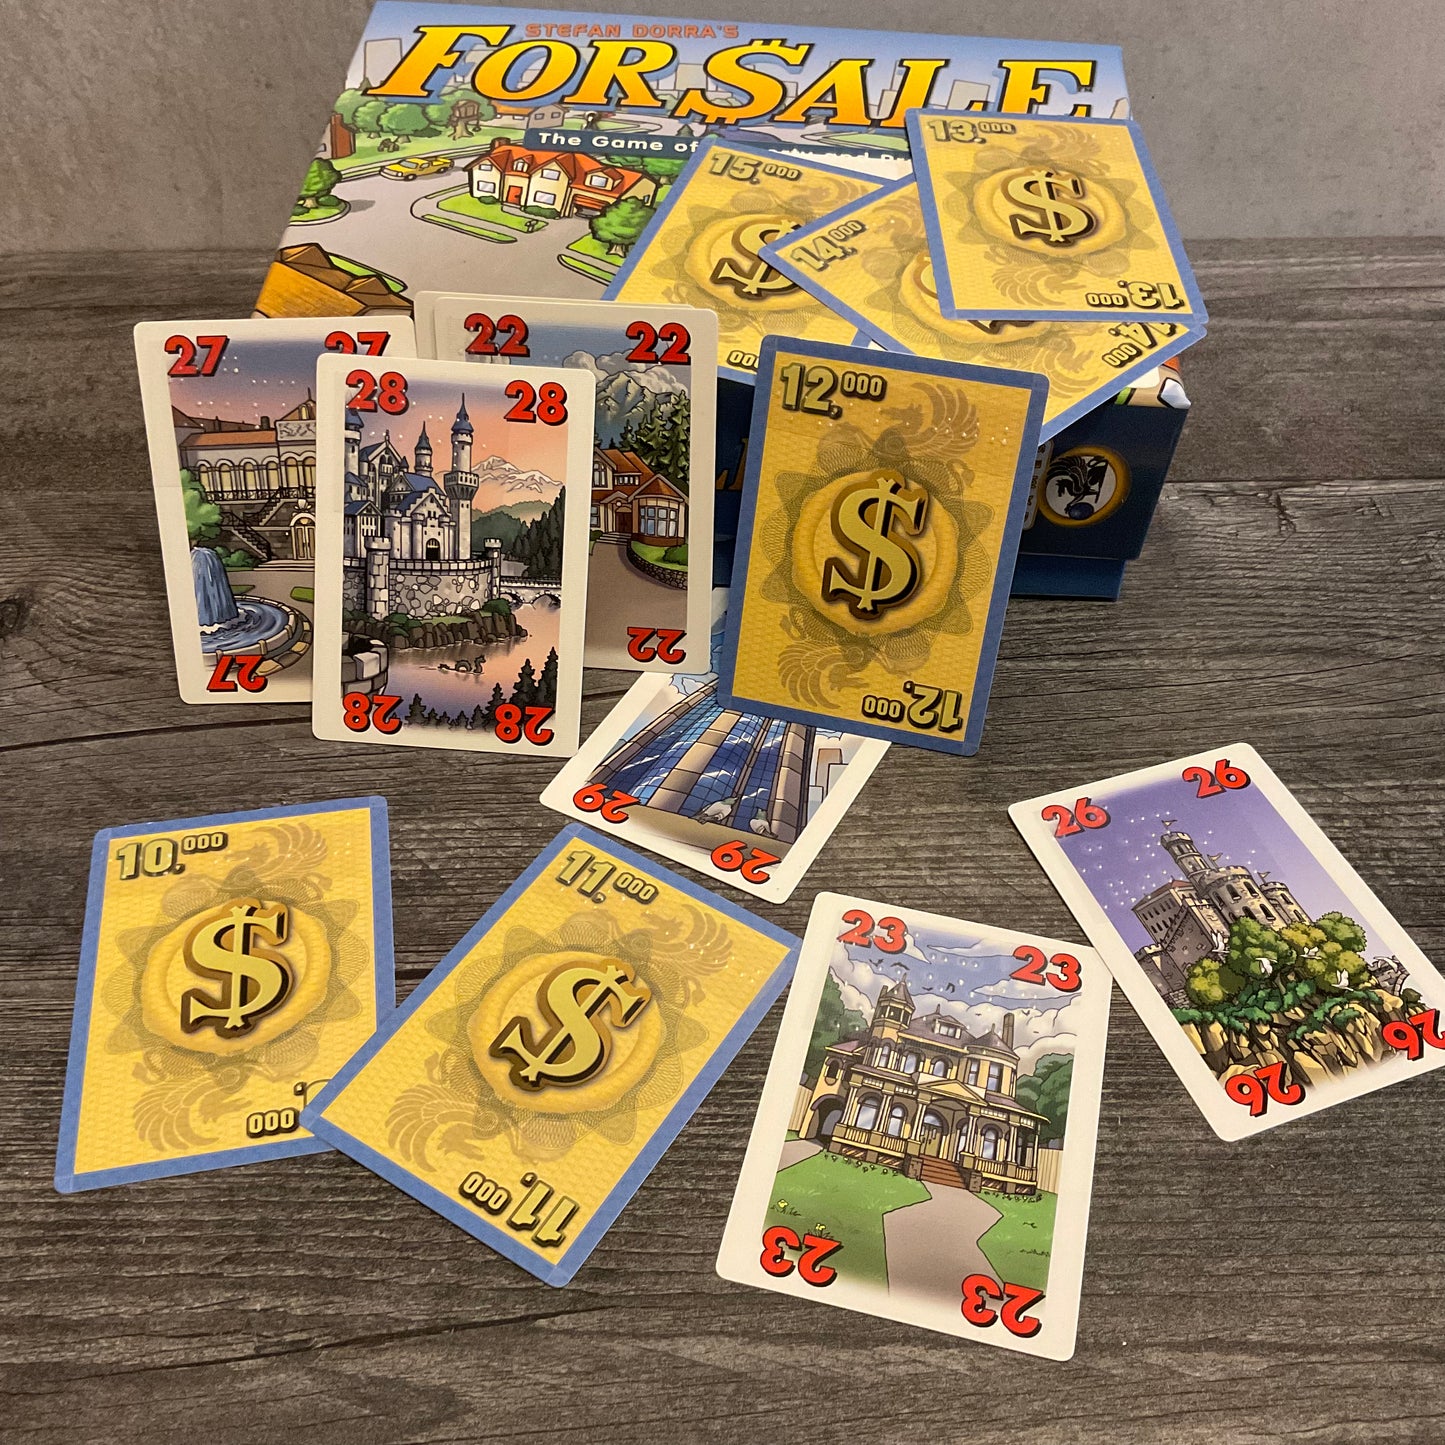 For Sale box with face up cards with houses and numbers on them as well as cards with money showing. All cards have braille stickers on them.